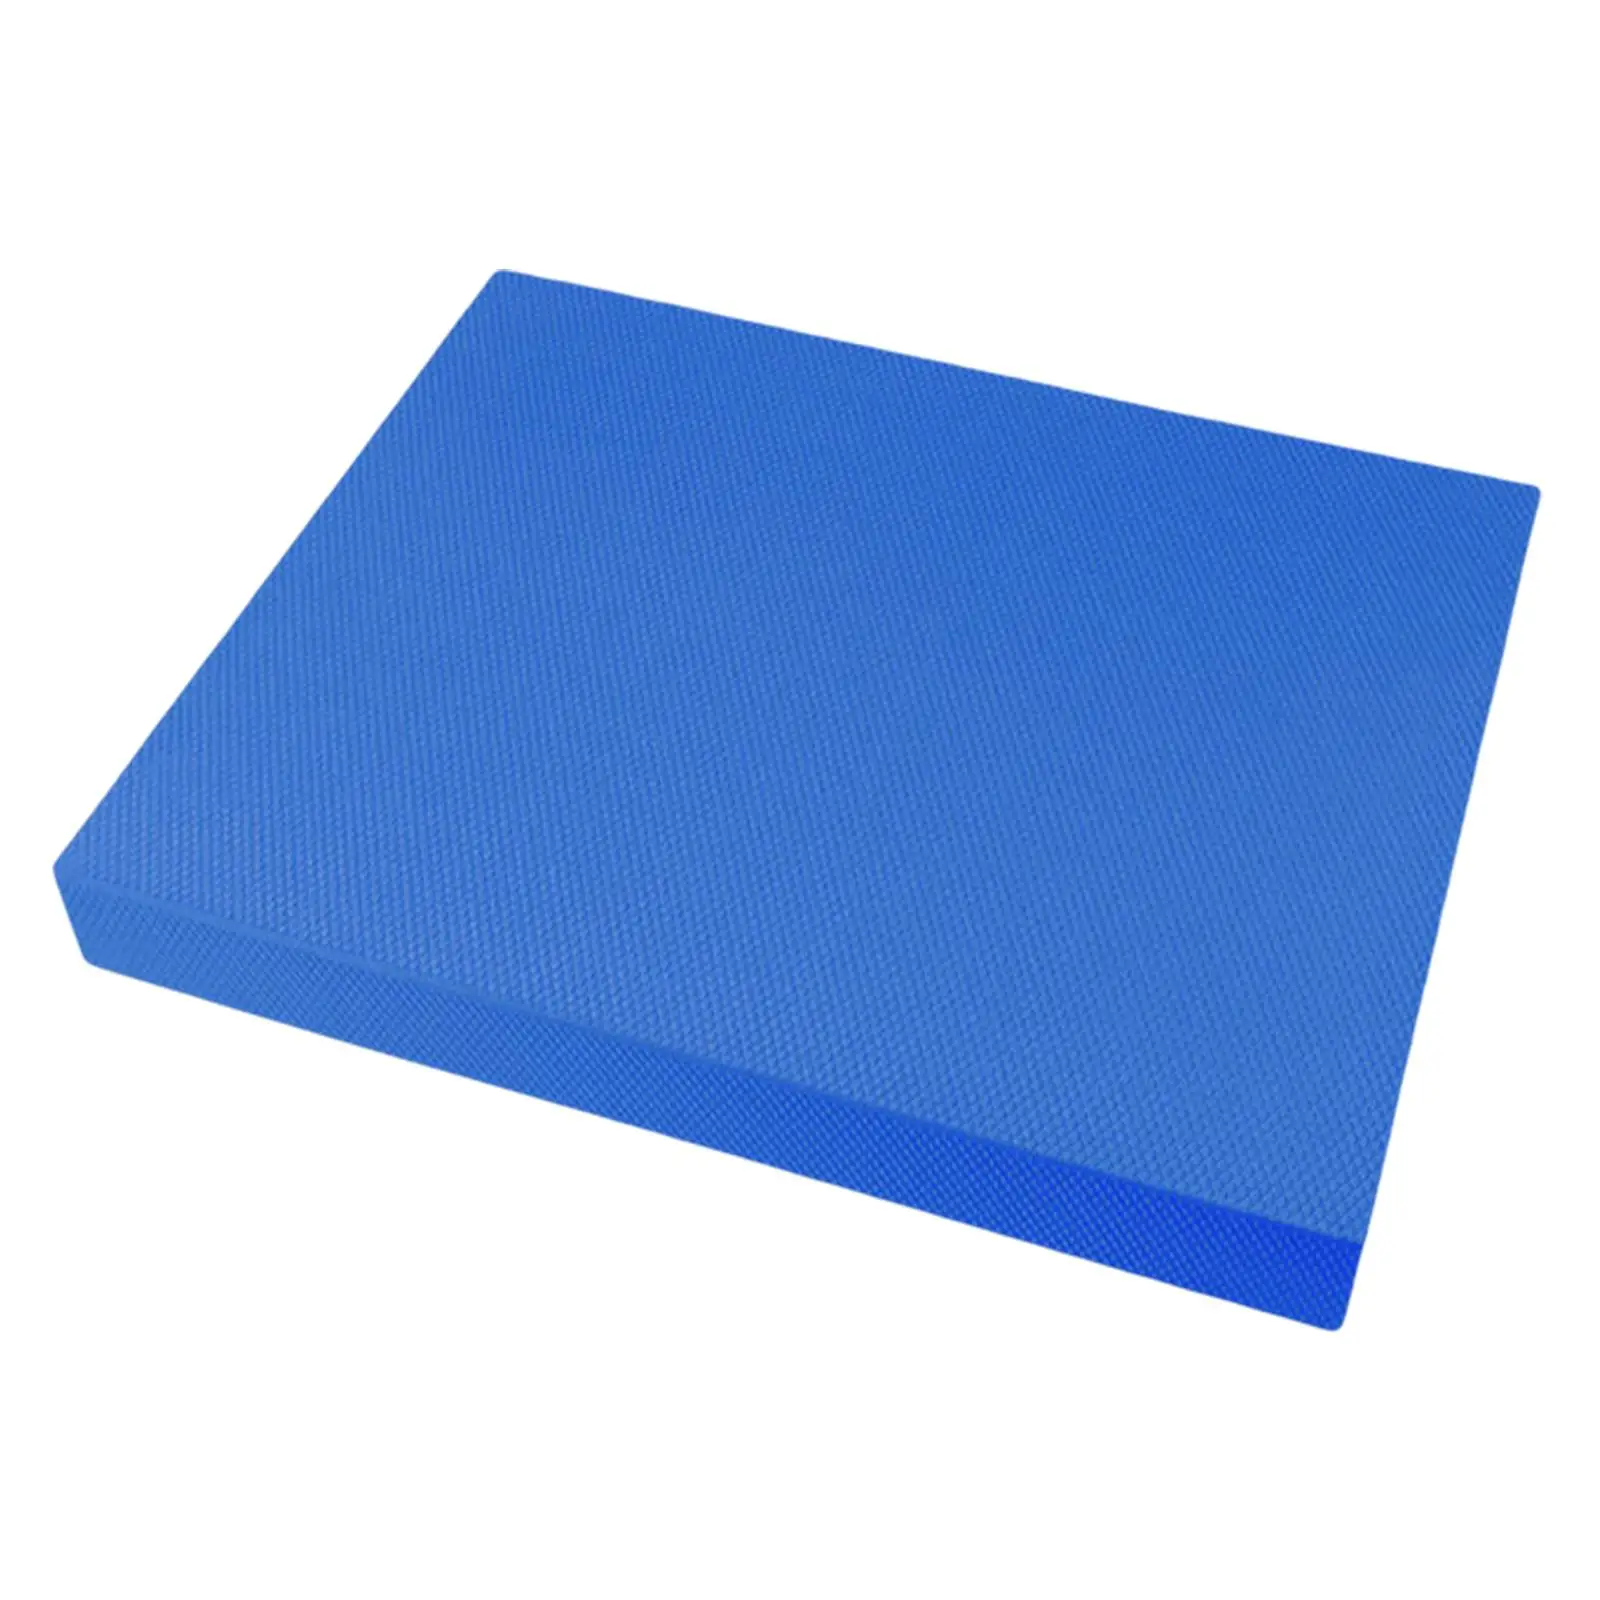 Exercise, Nonslip Cushioned Foam Mat Knee Pad for Fitness and Stability Training, Yoga, 15.75